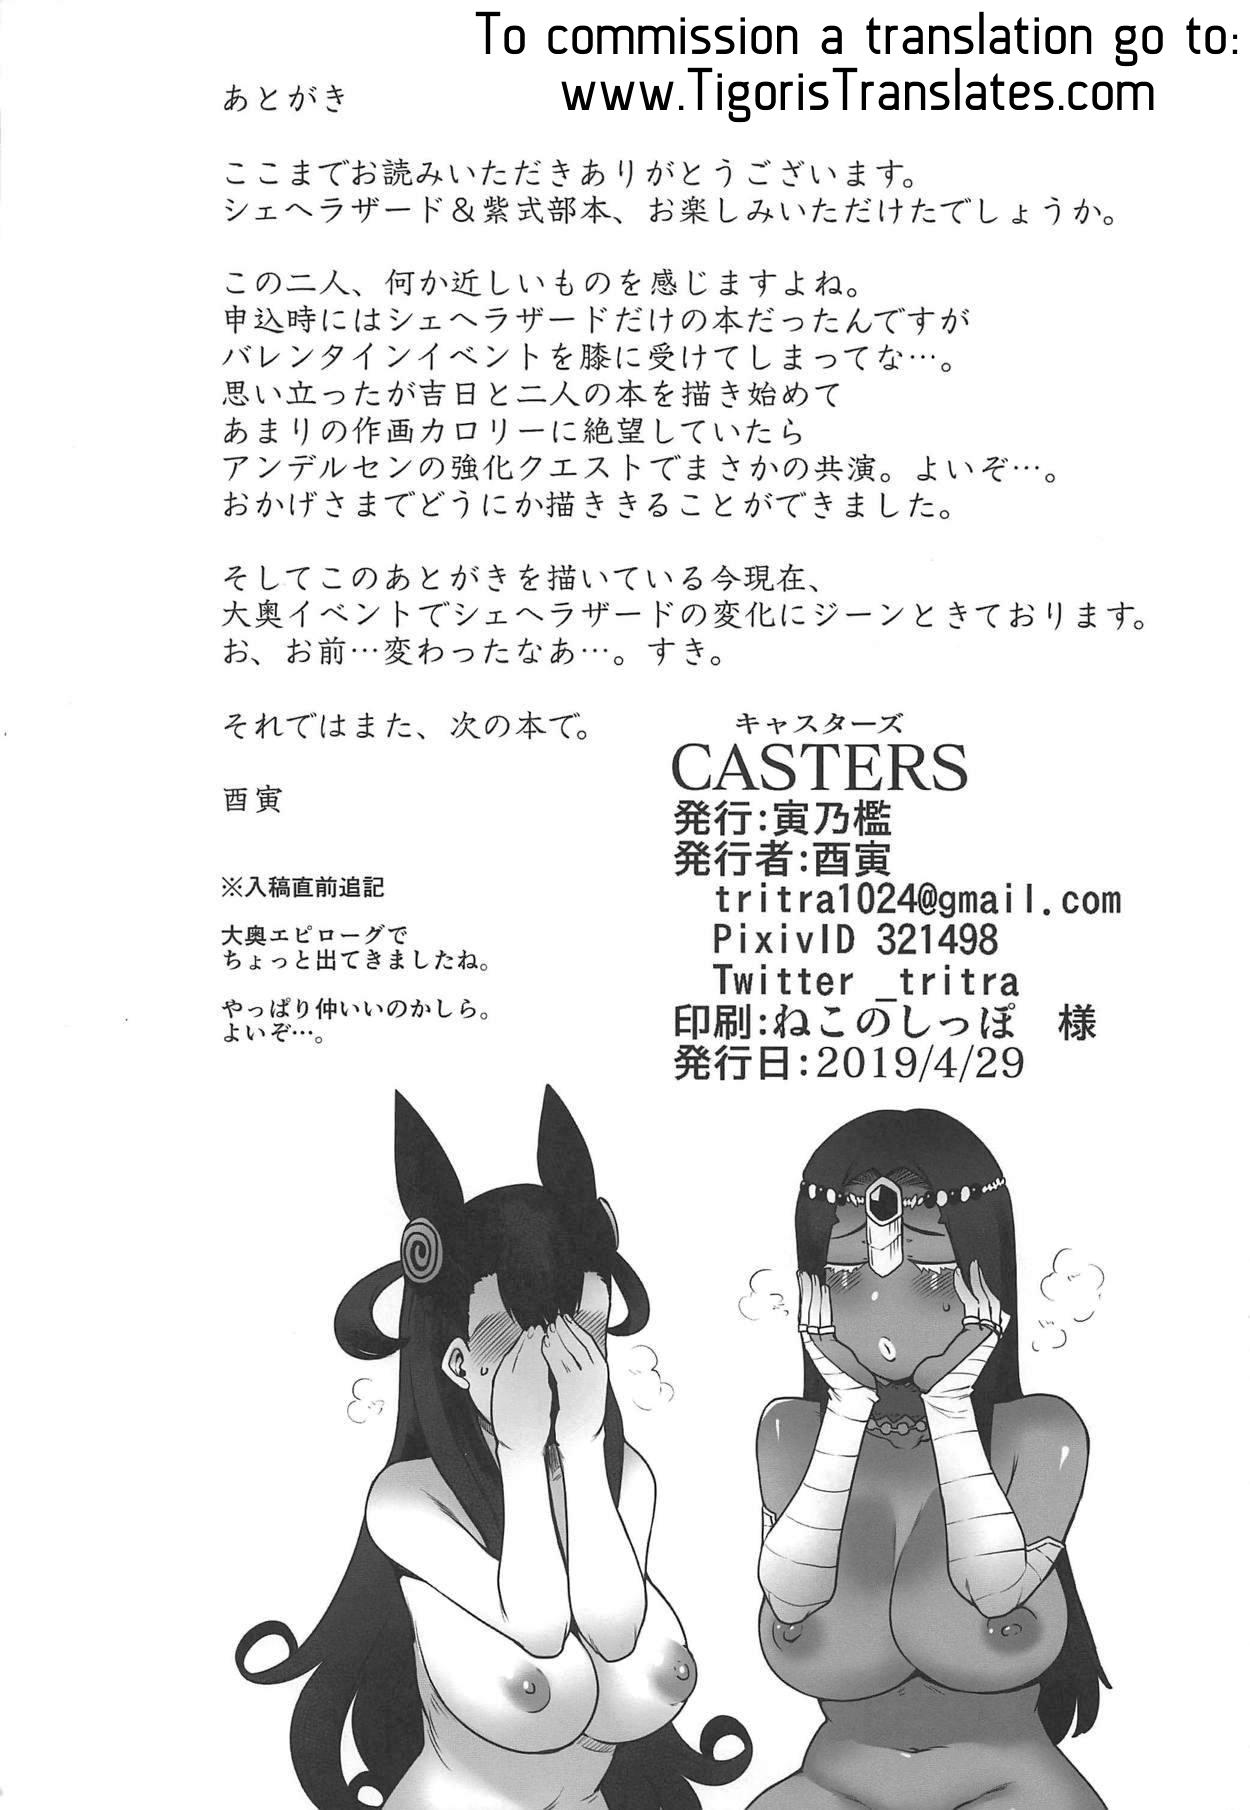 CASTERS 20